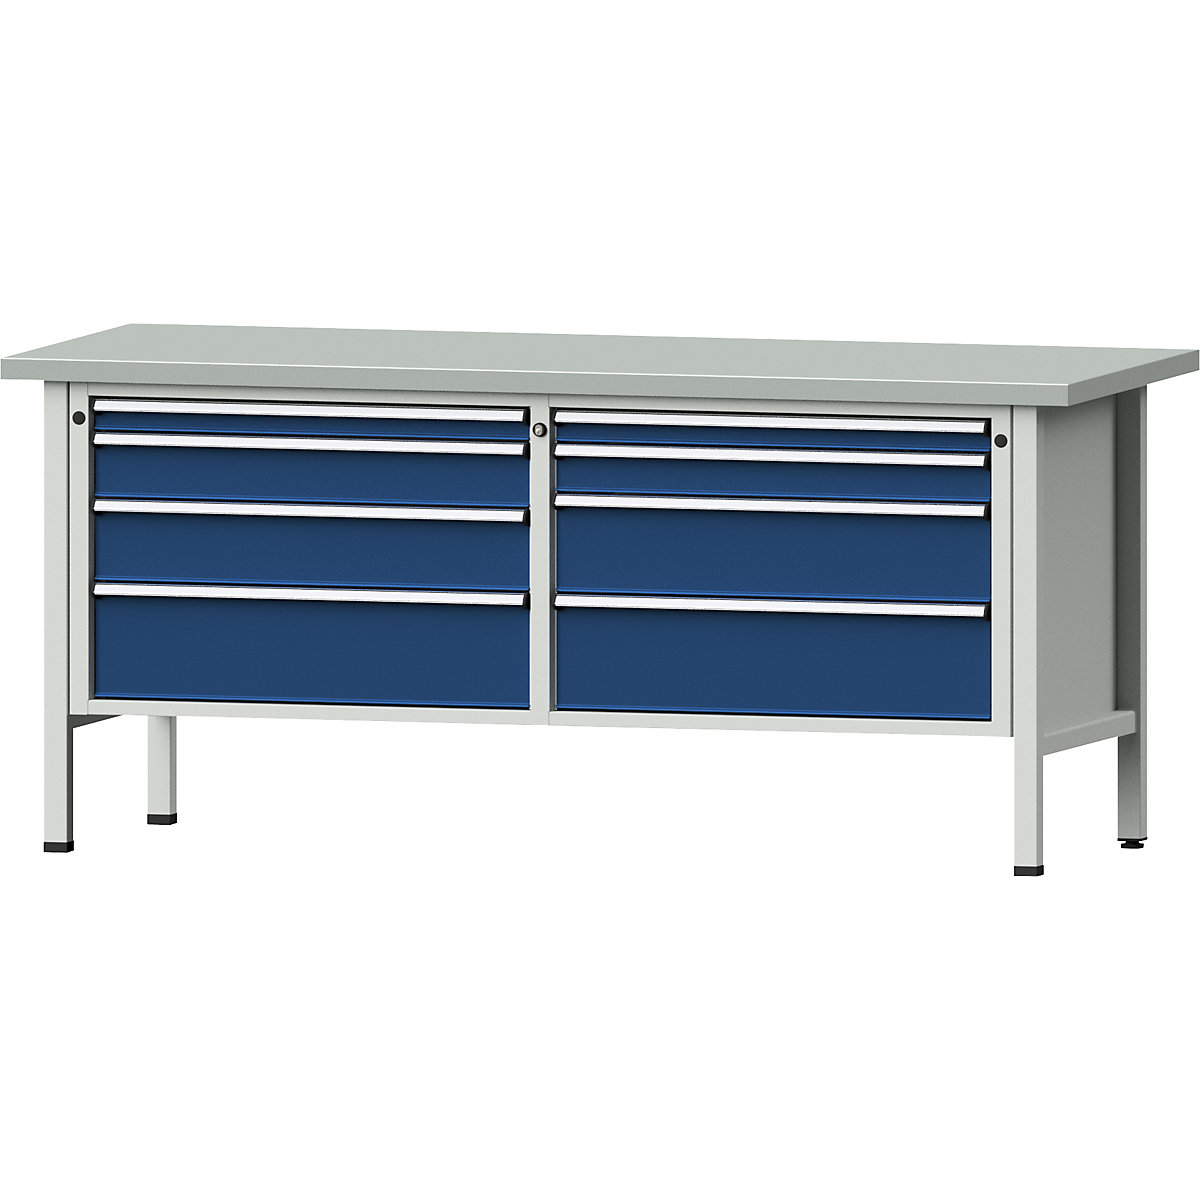 Workbenches 2000 mm wide, frame construction – ANKE, 8 drawers, sheet steel covered worktop, height 890 mm-12